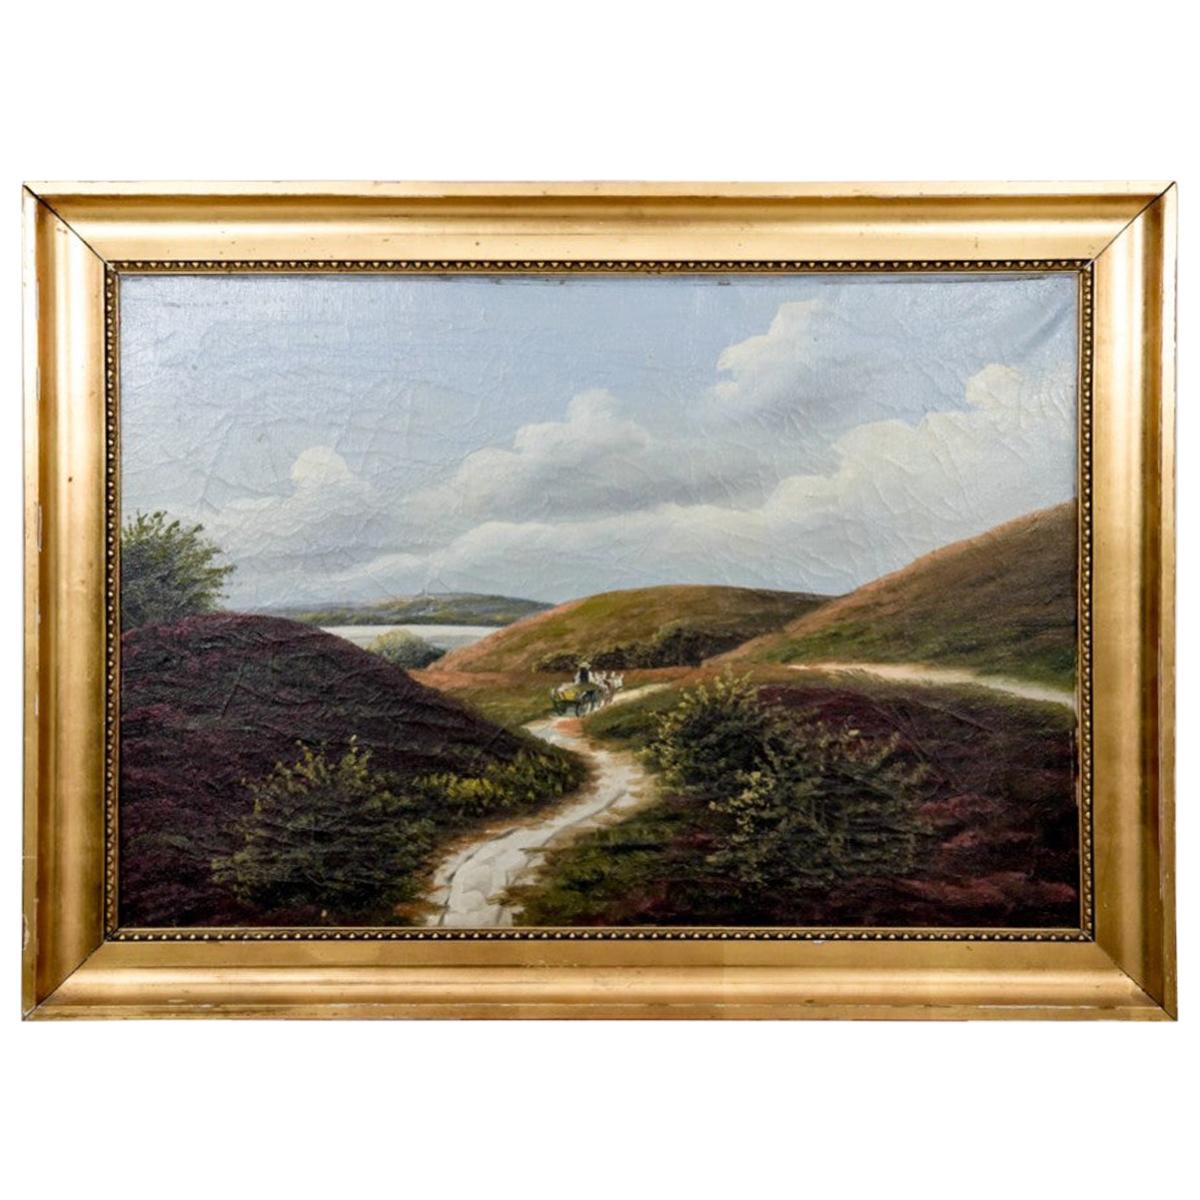 Painting "Road through the hills"